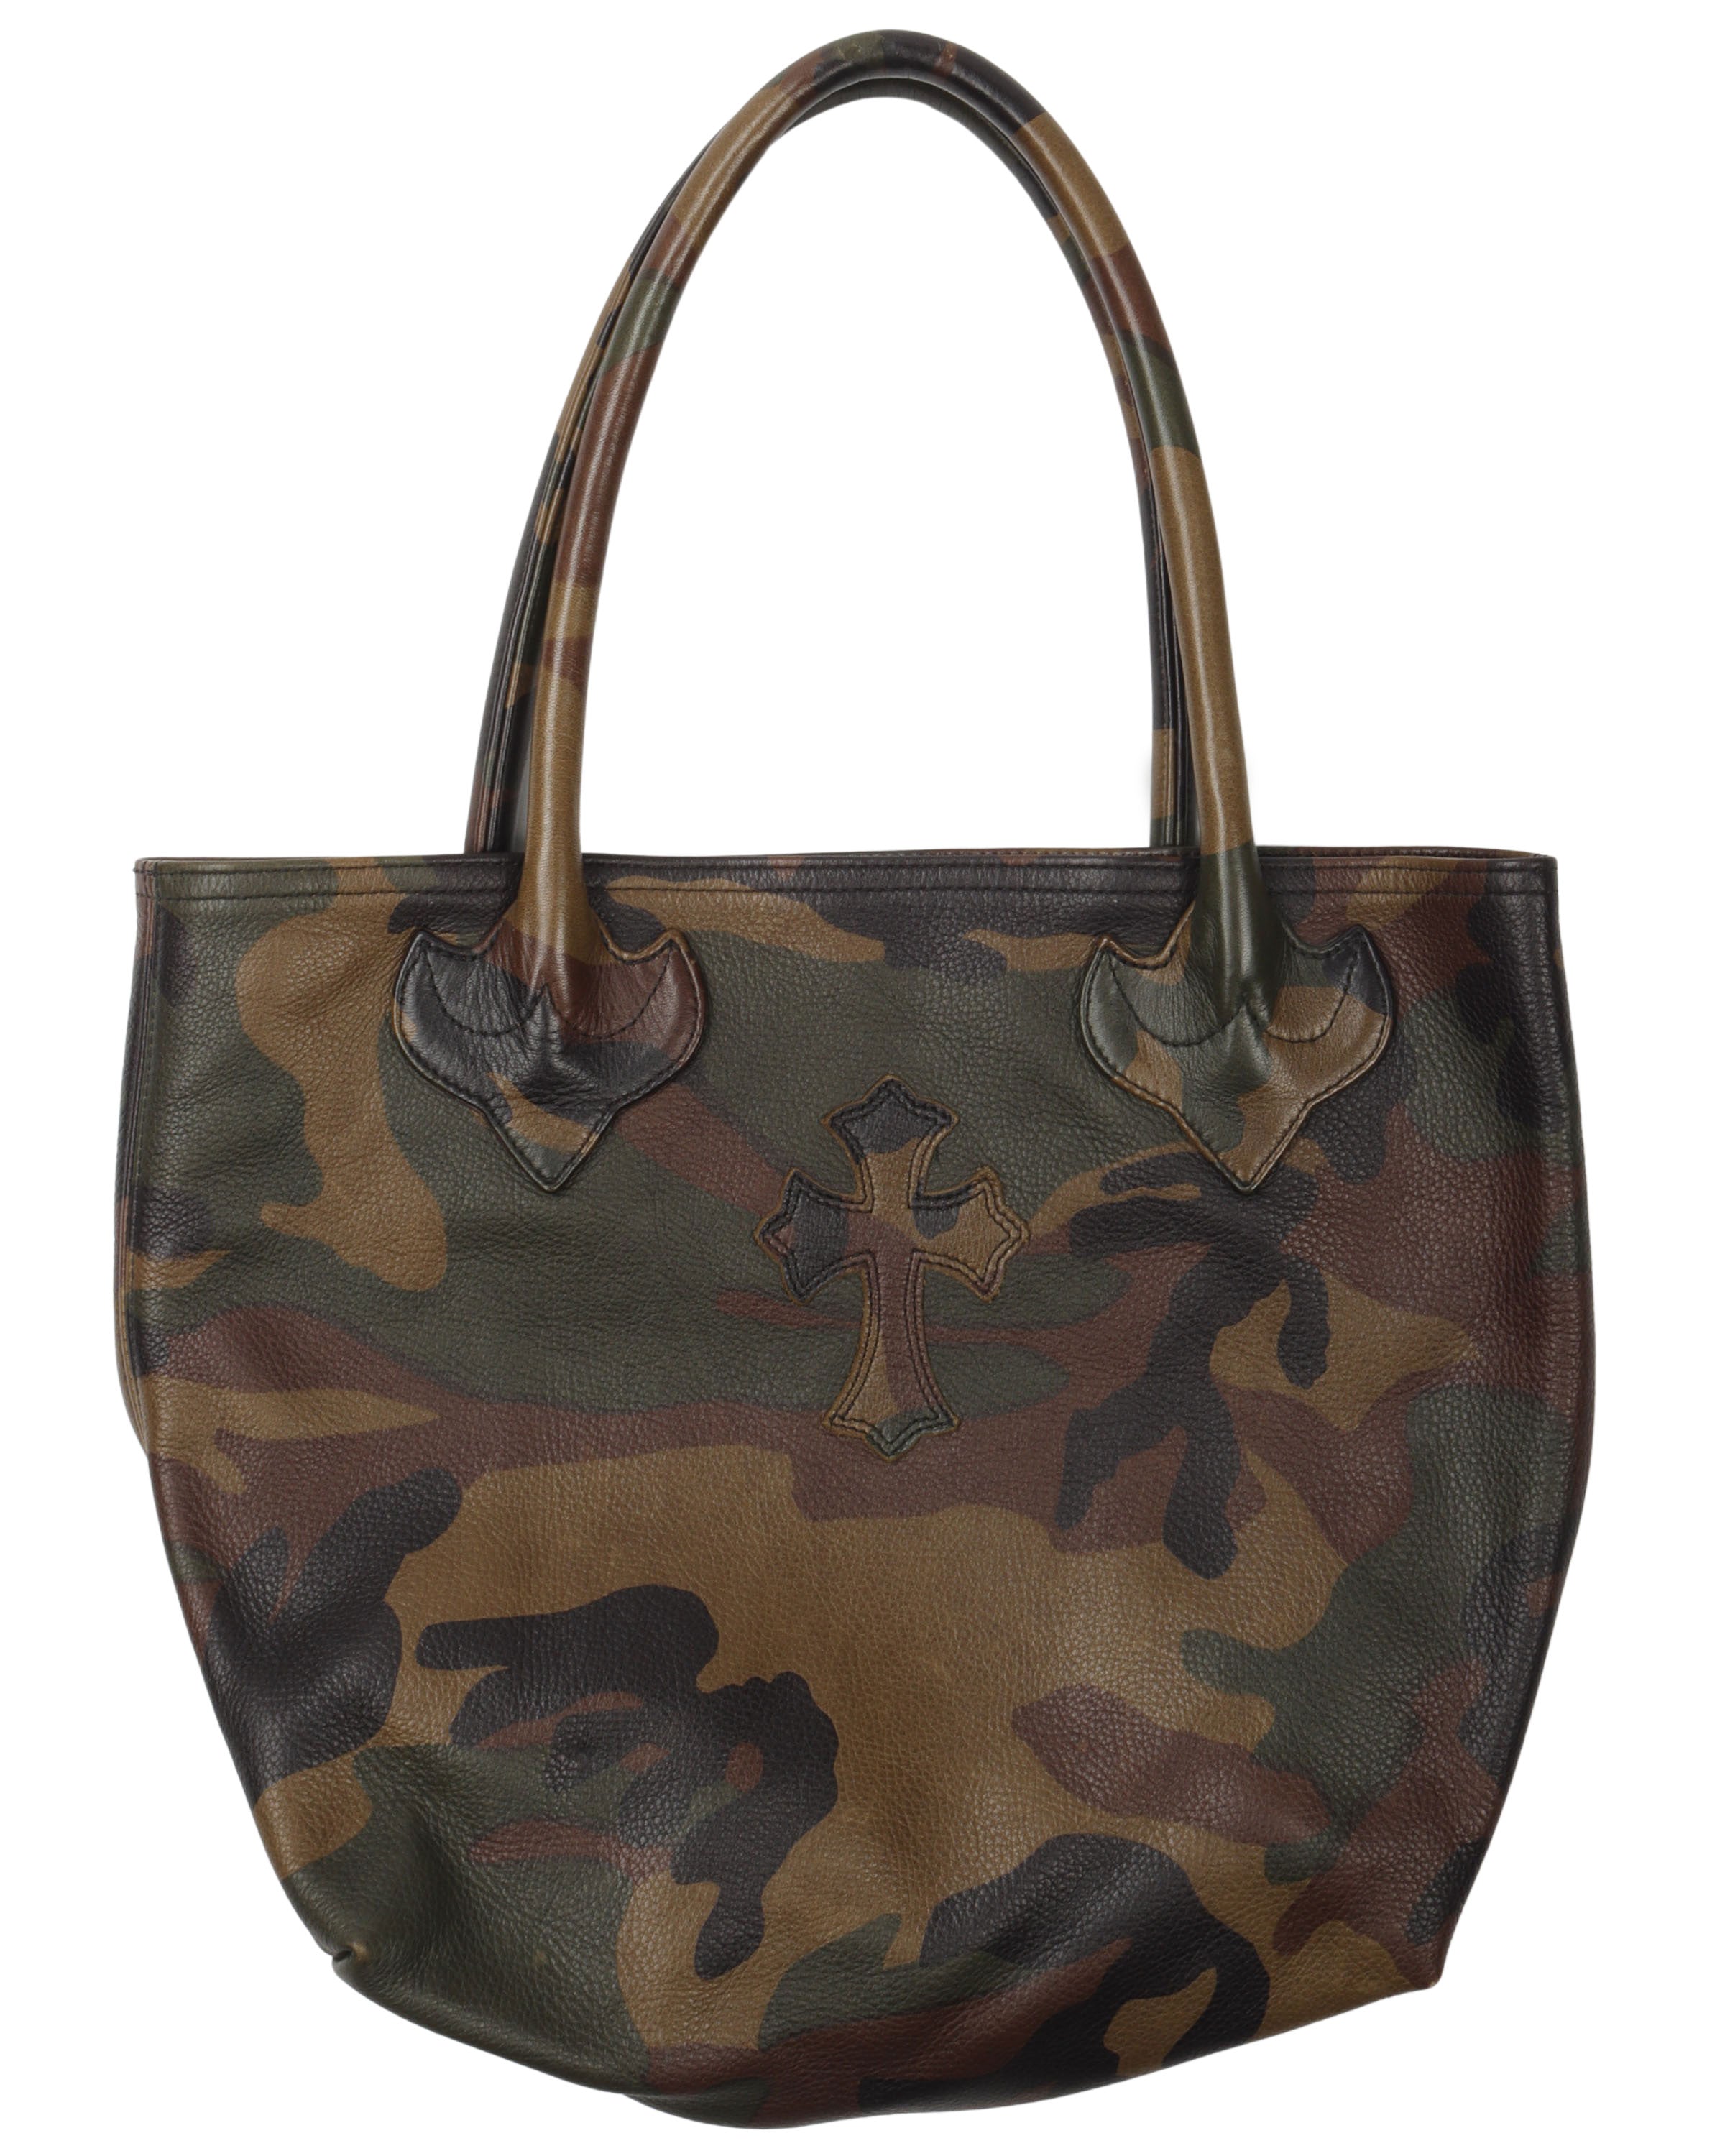 Chrome Hearts Camouflage Leather Cross Patch Tote Bag